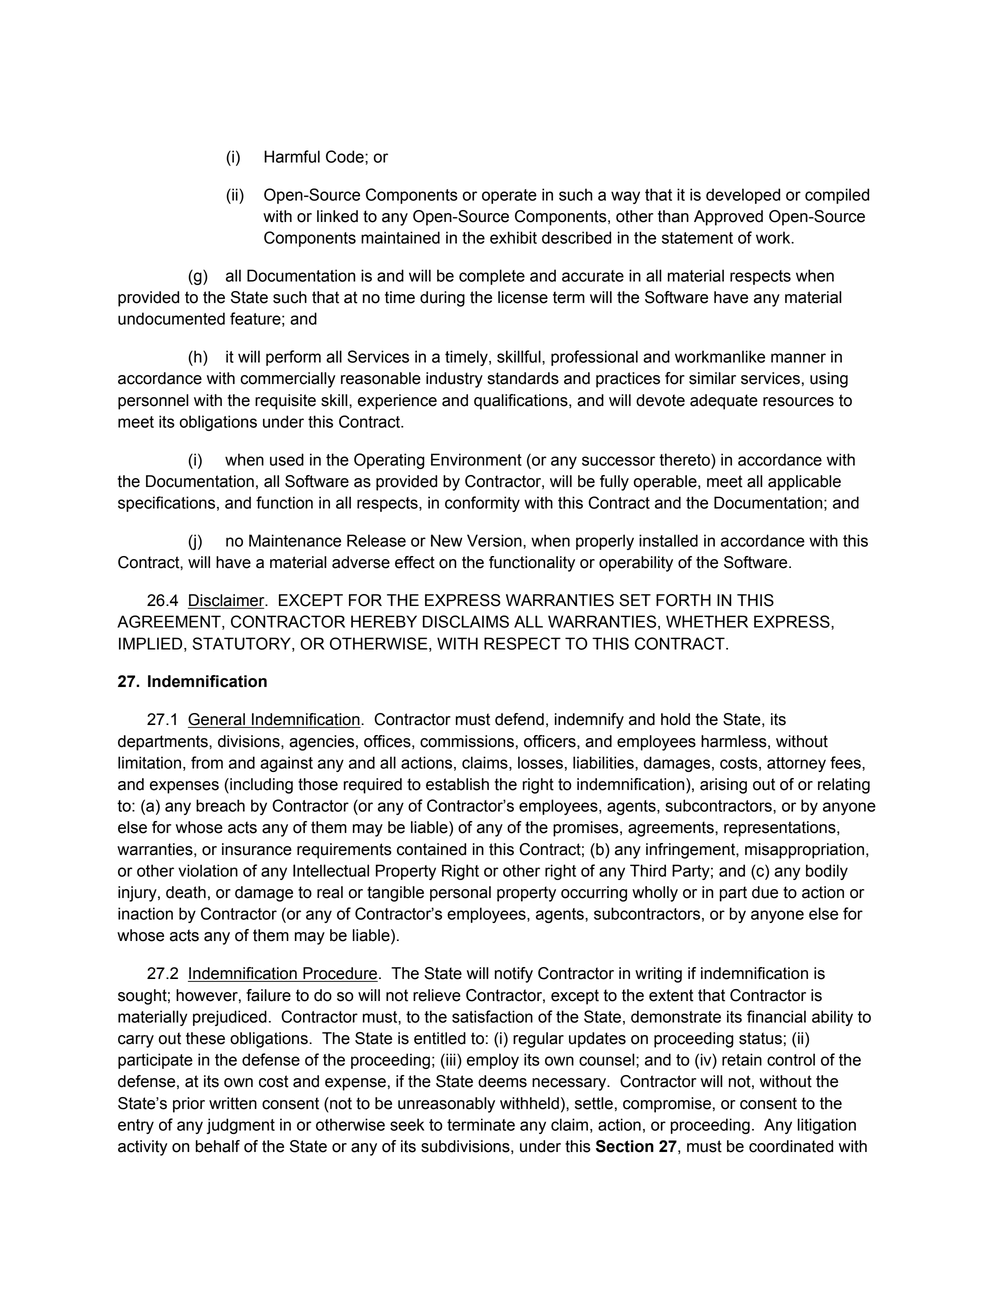 Page 28 from State of Michigan 2020 Kaseware contract